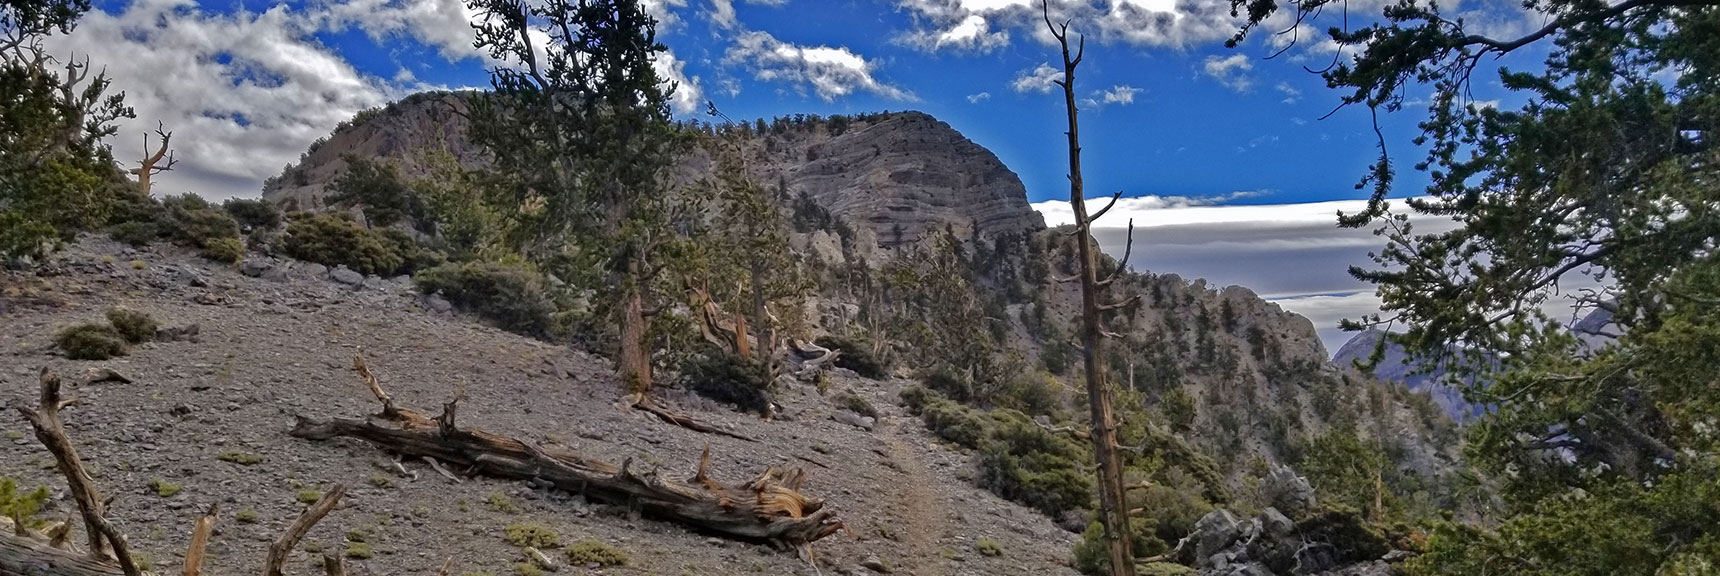 Reconnected with the Main Trail That Took the Western Ridge. | The Sisters South | Lee Canyon | Mt Charleston Wilderness | Spring Mountains, Nevada